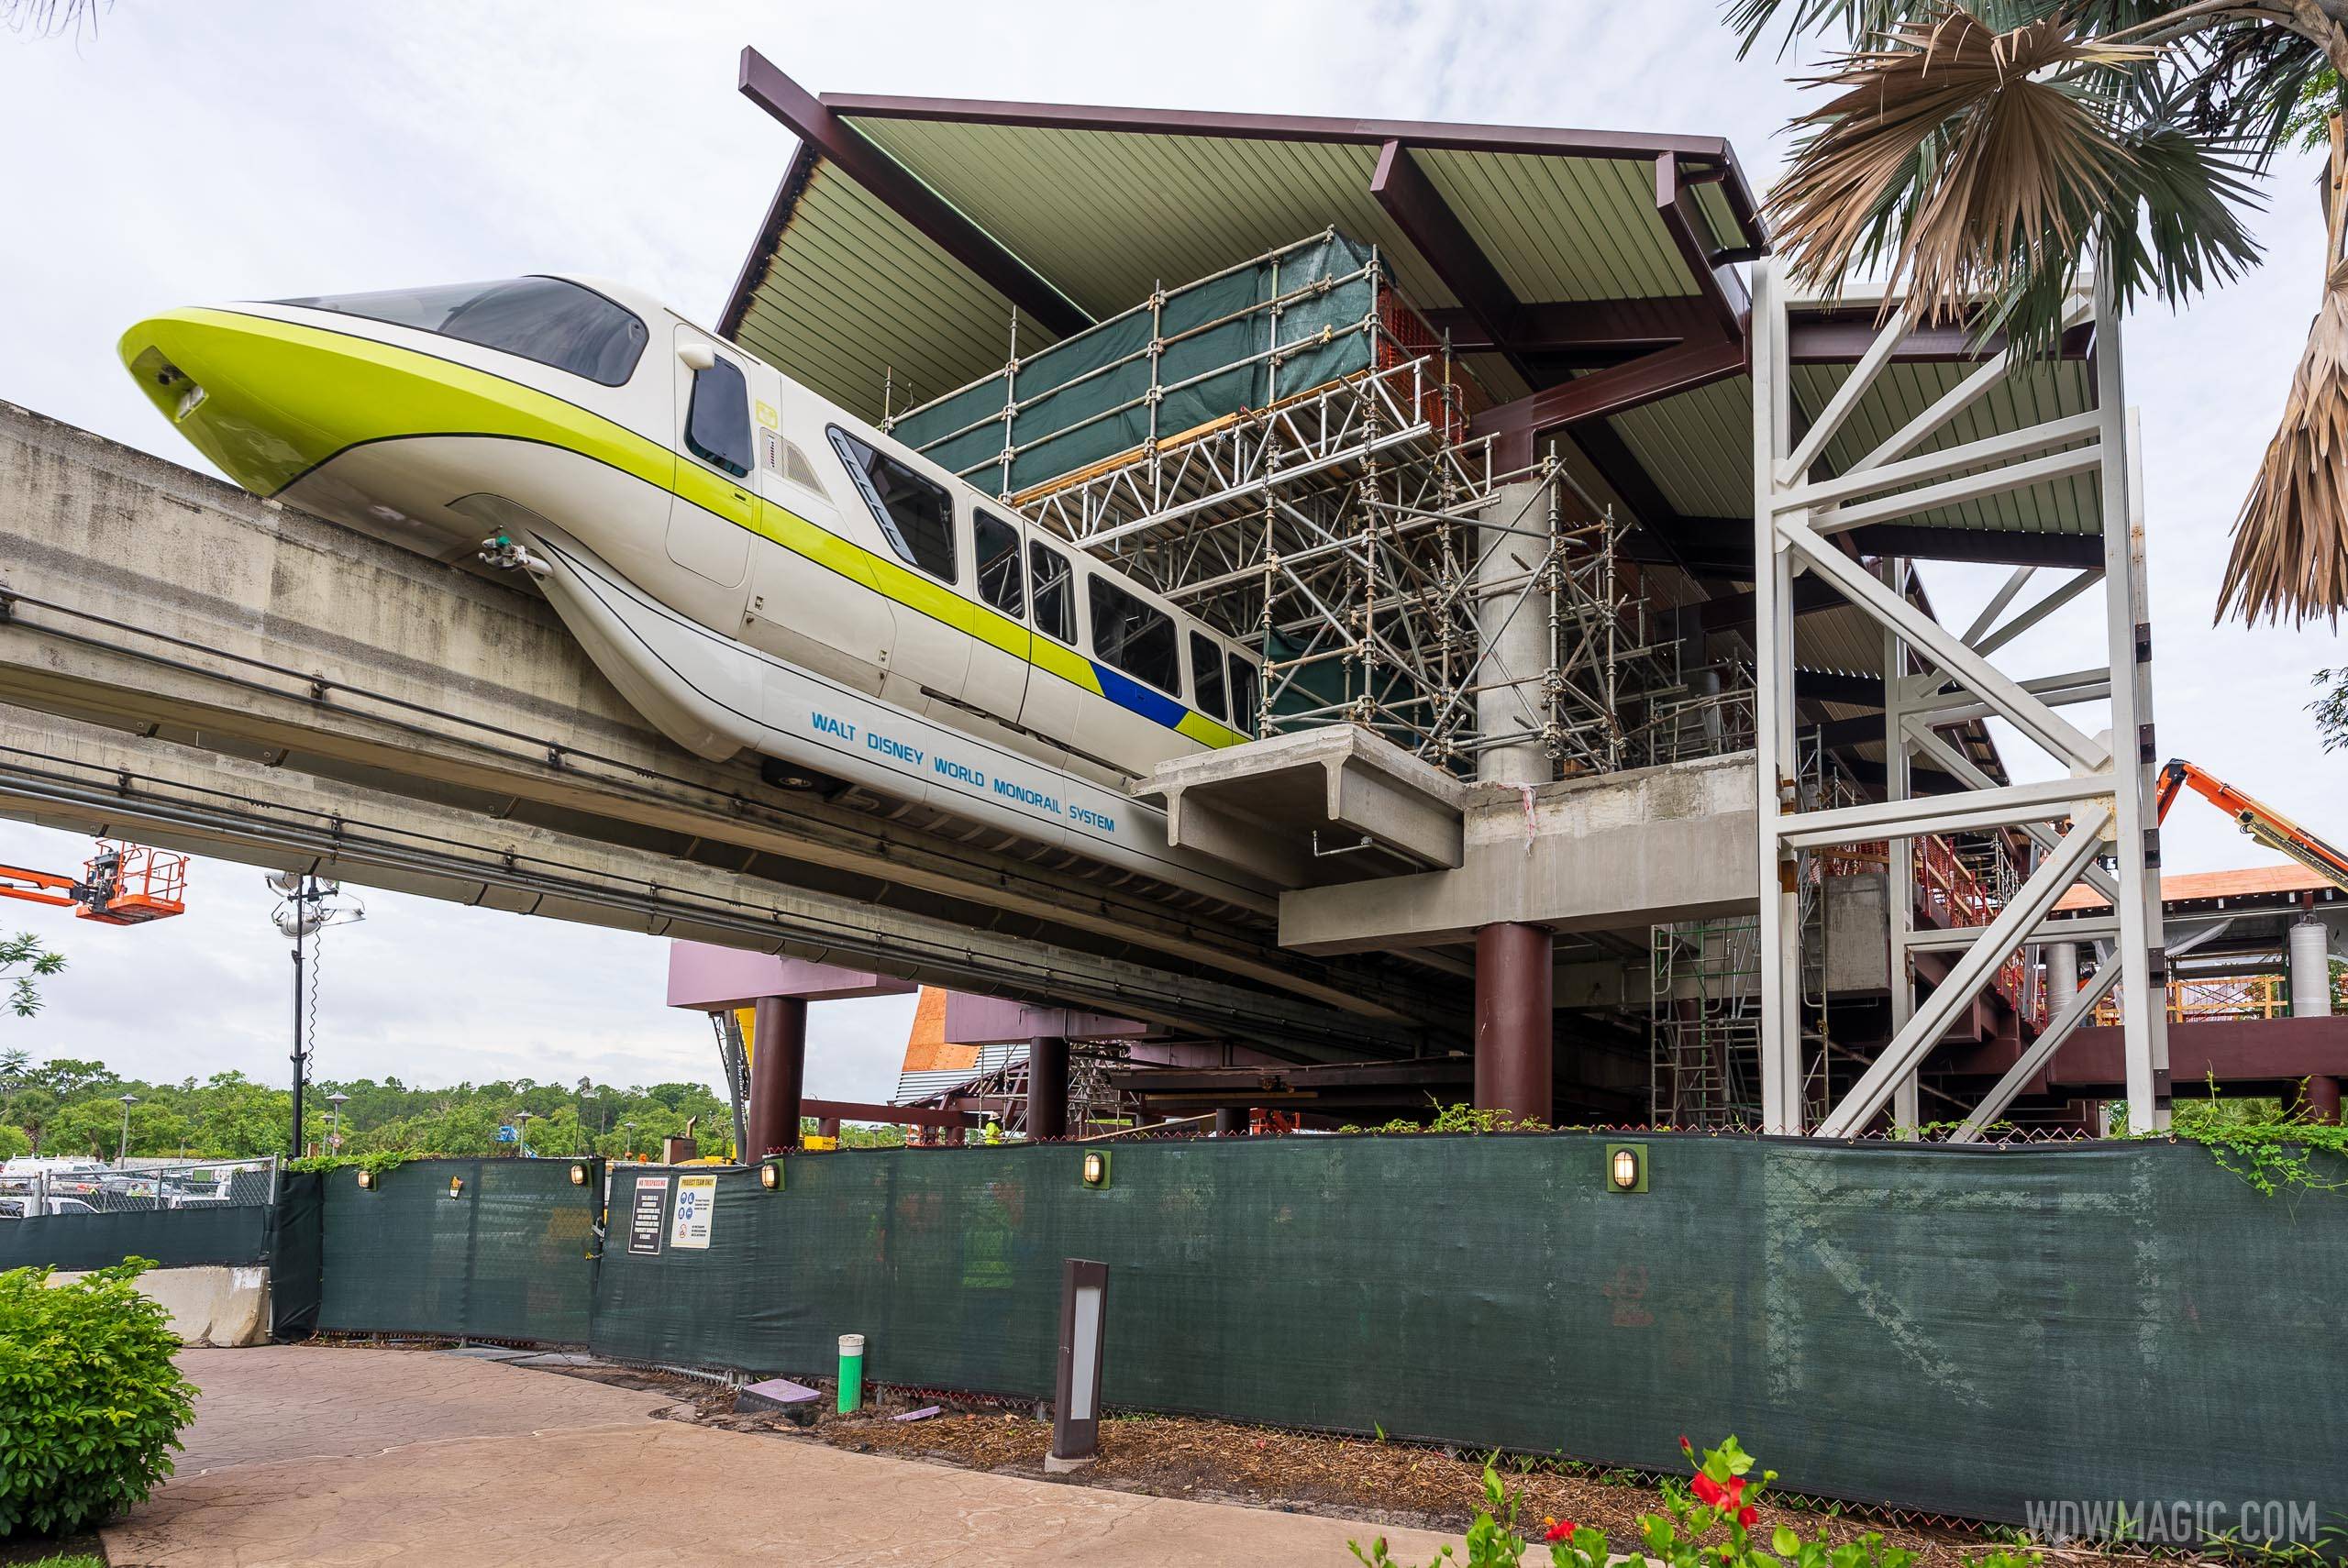 The new monorail station is still under construction and will not be ready for the July 19 reopening